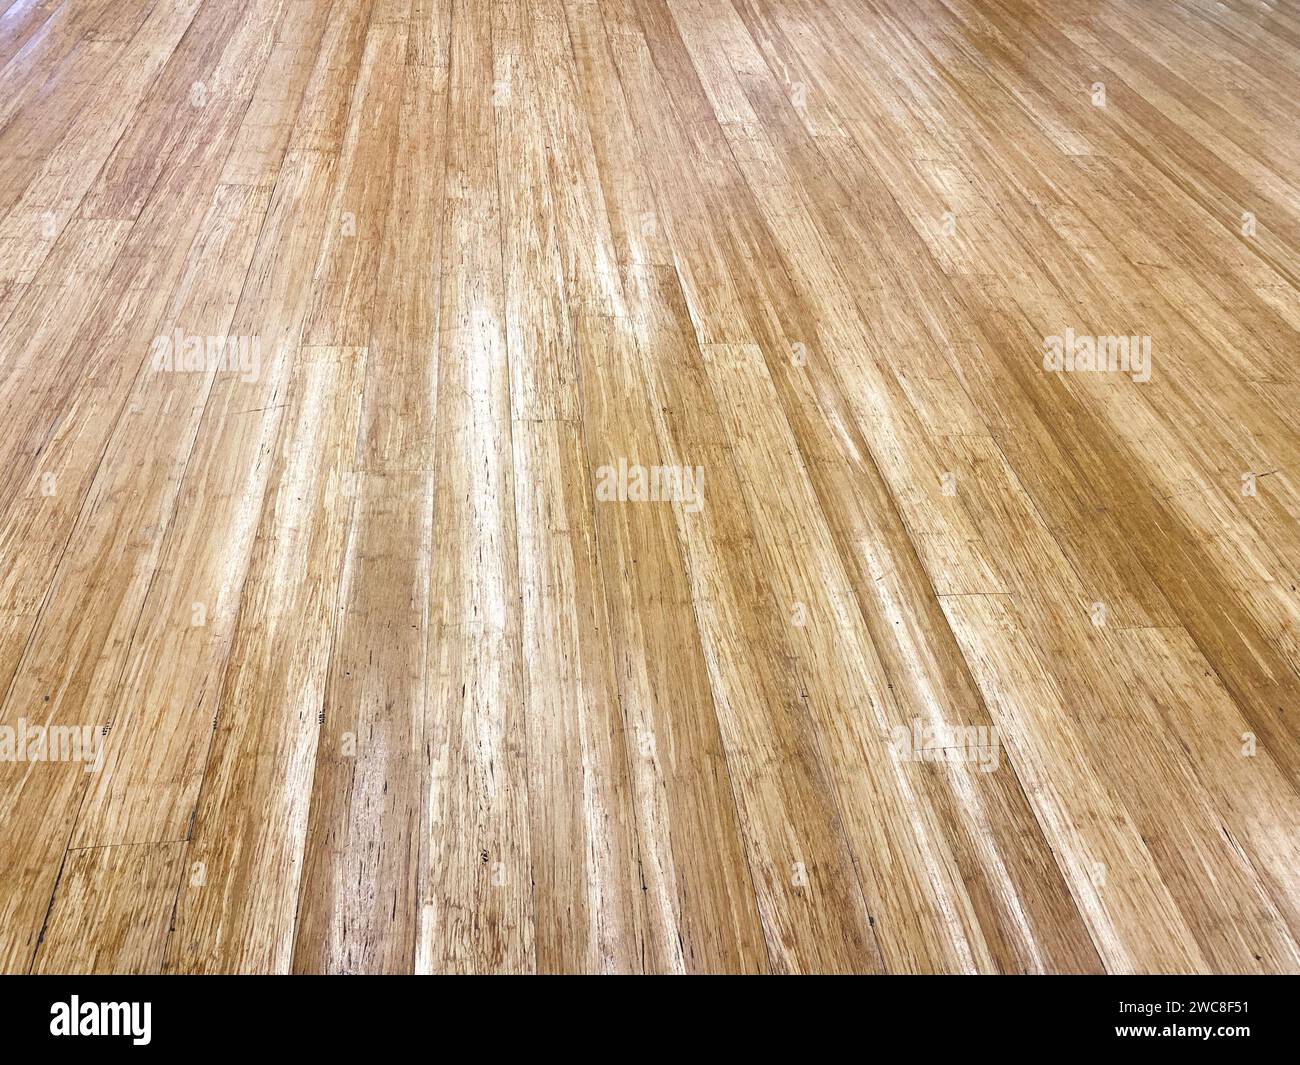 Horizontal wood paneling, creating a sense of space and openness in your design layout. Stock Photo